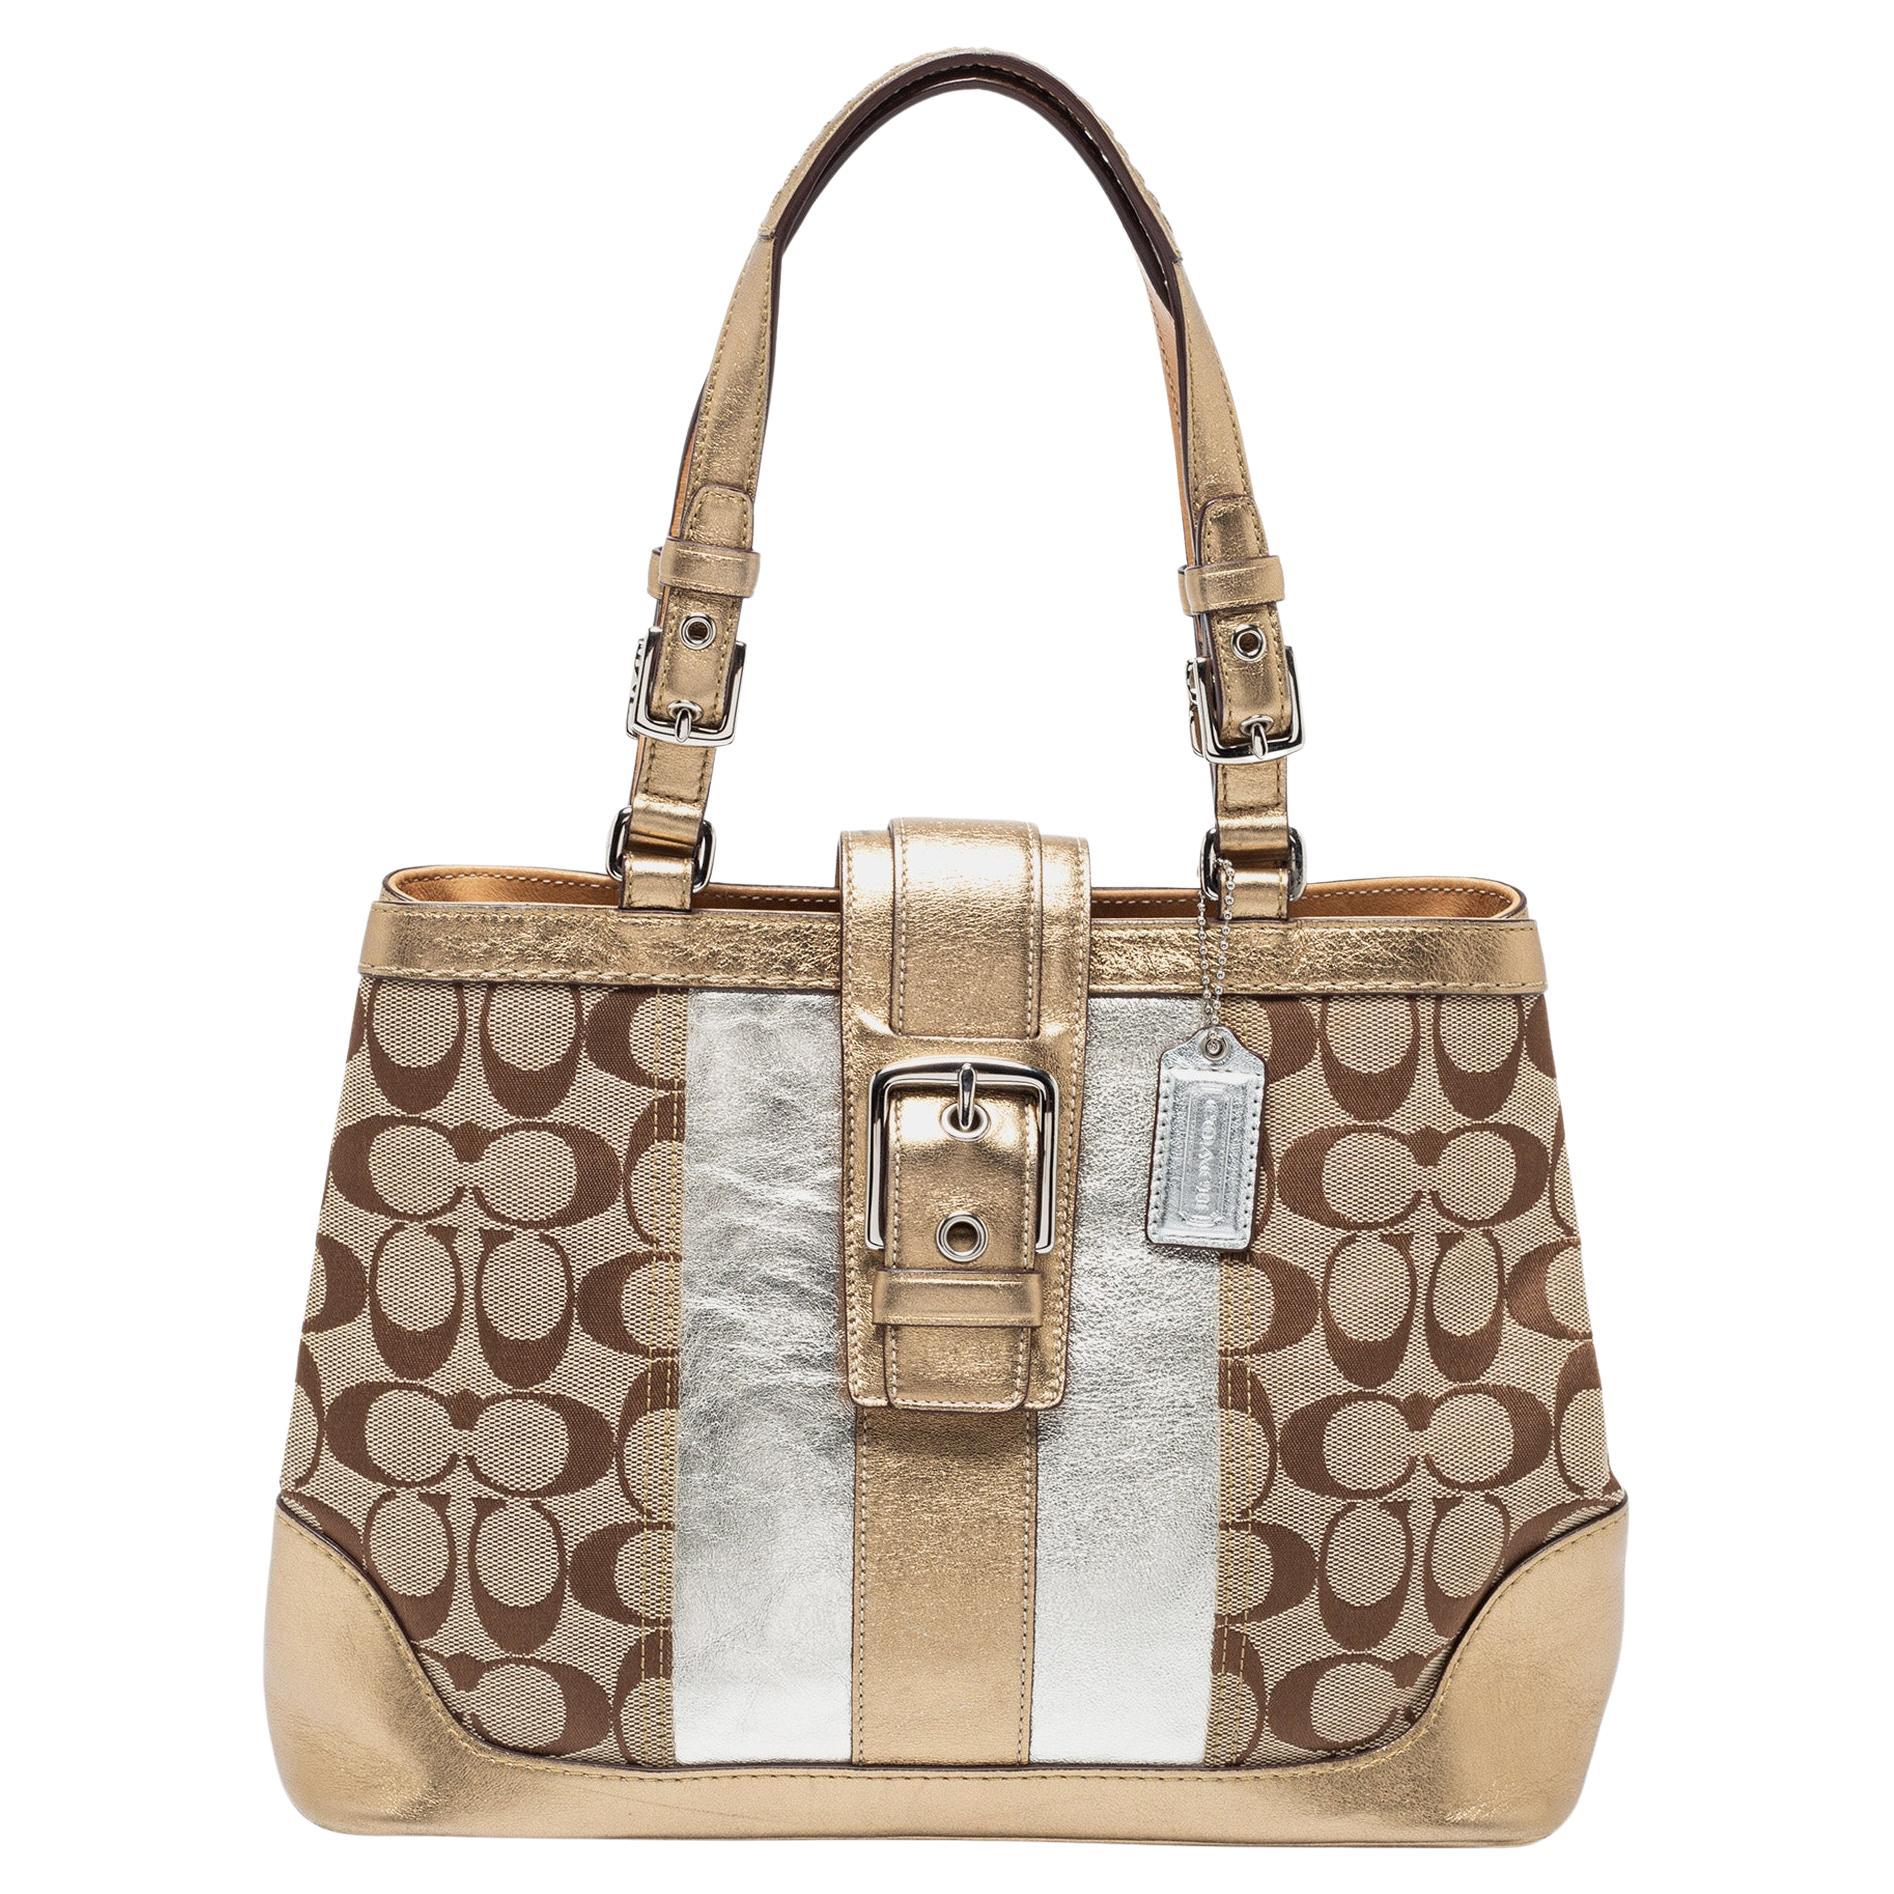 Coach Metallic Gold/Silver Signature Canvas And Leather Tote